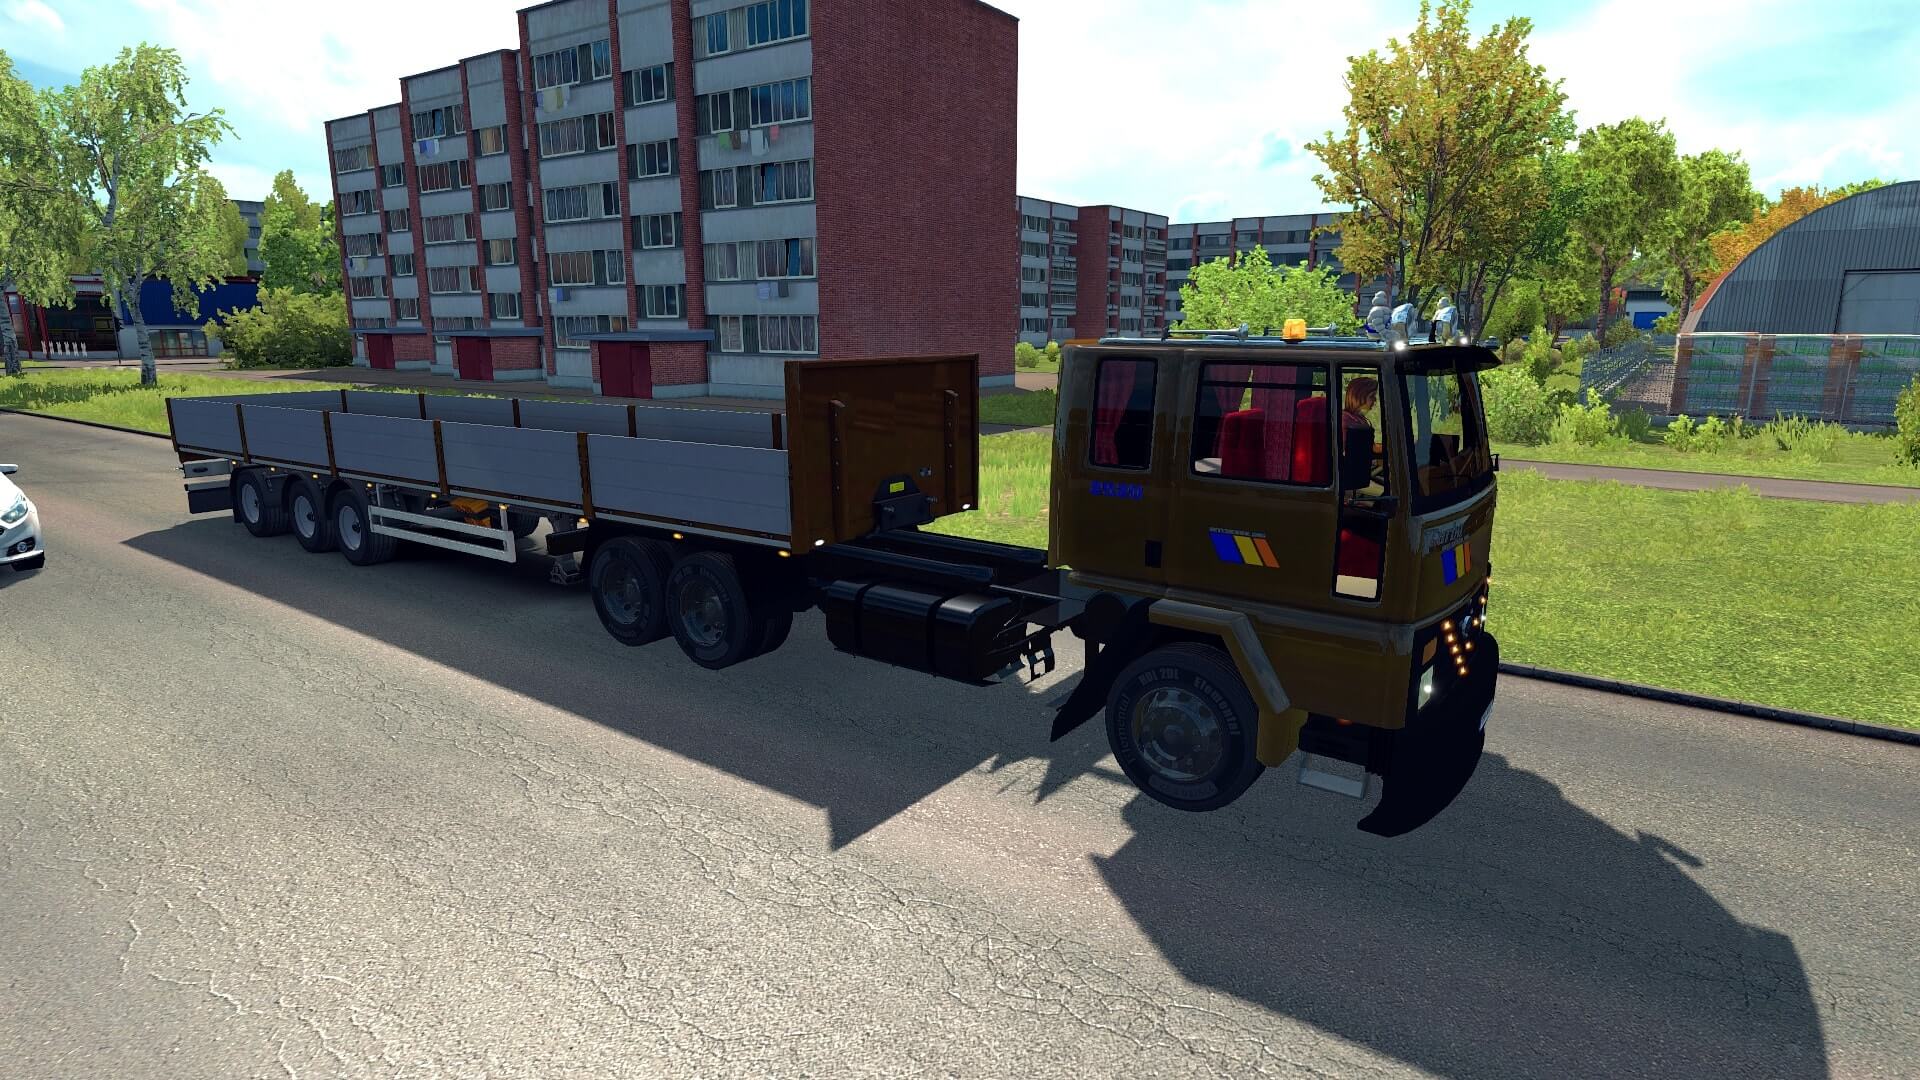 Ford Cargo 2520